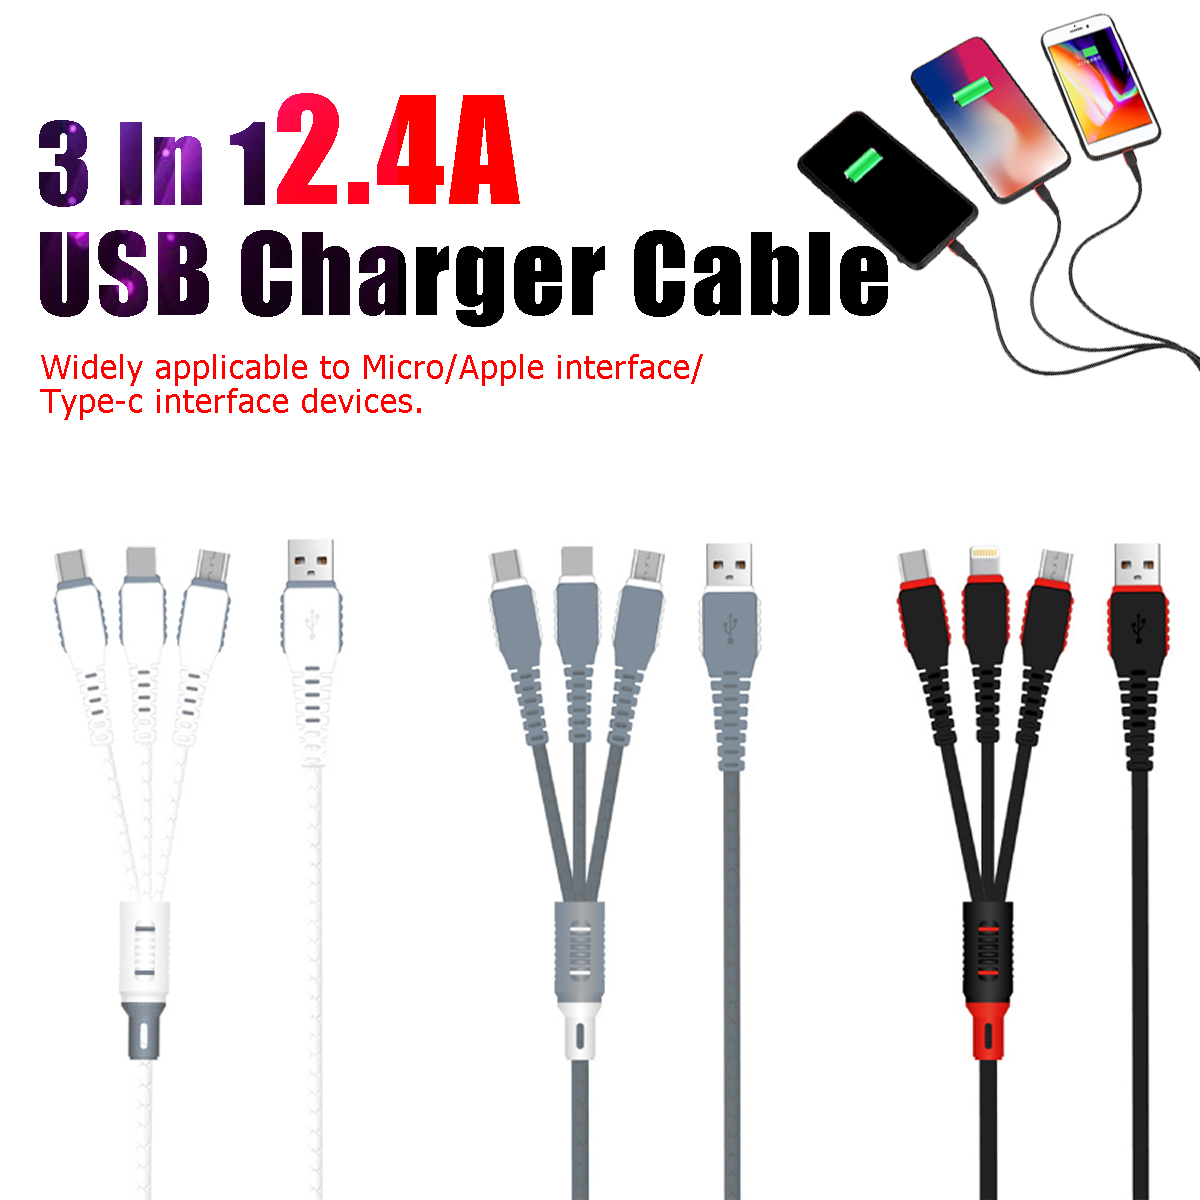 3-In-1-USB-Charger-Cable-Micro-USB-Type-C-Cable-24A-Fast-Charging-Cable-Charger-Cord-1706087